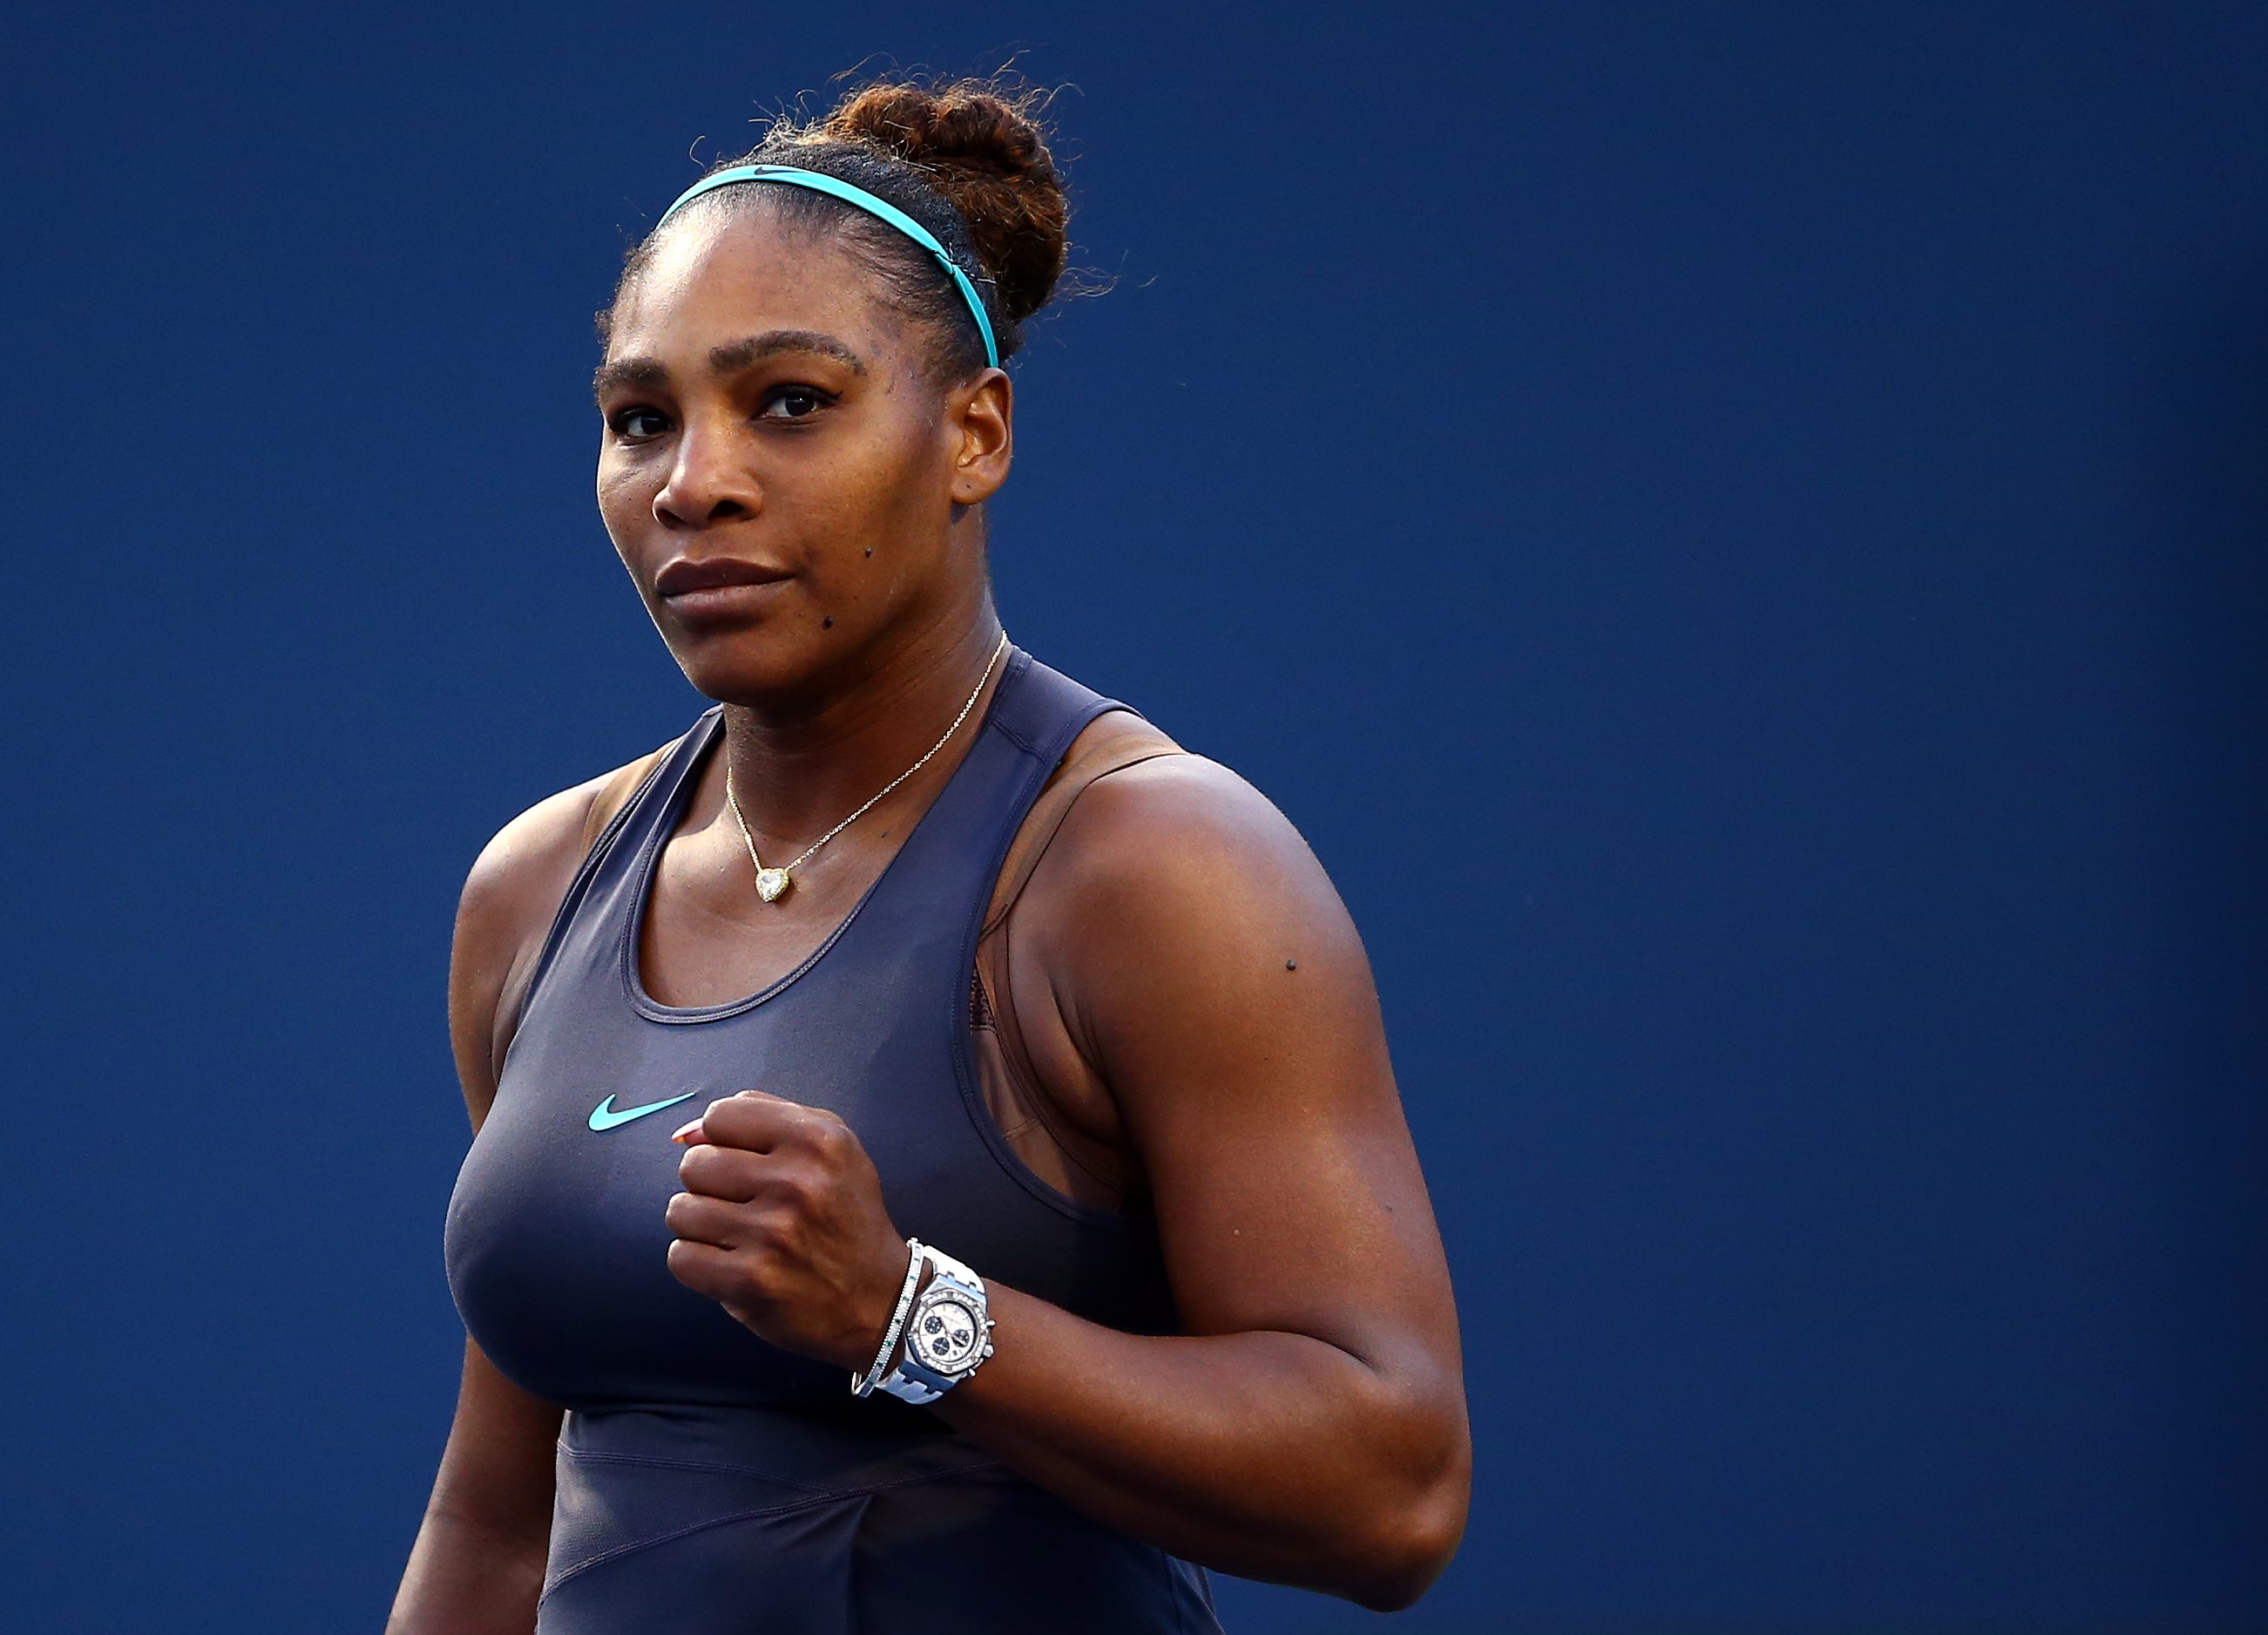 Serena Williams Speaks Out After Being Forced To Withdraw From Rogers Cup Final Due To Injury